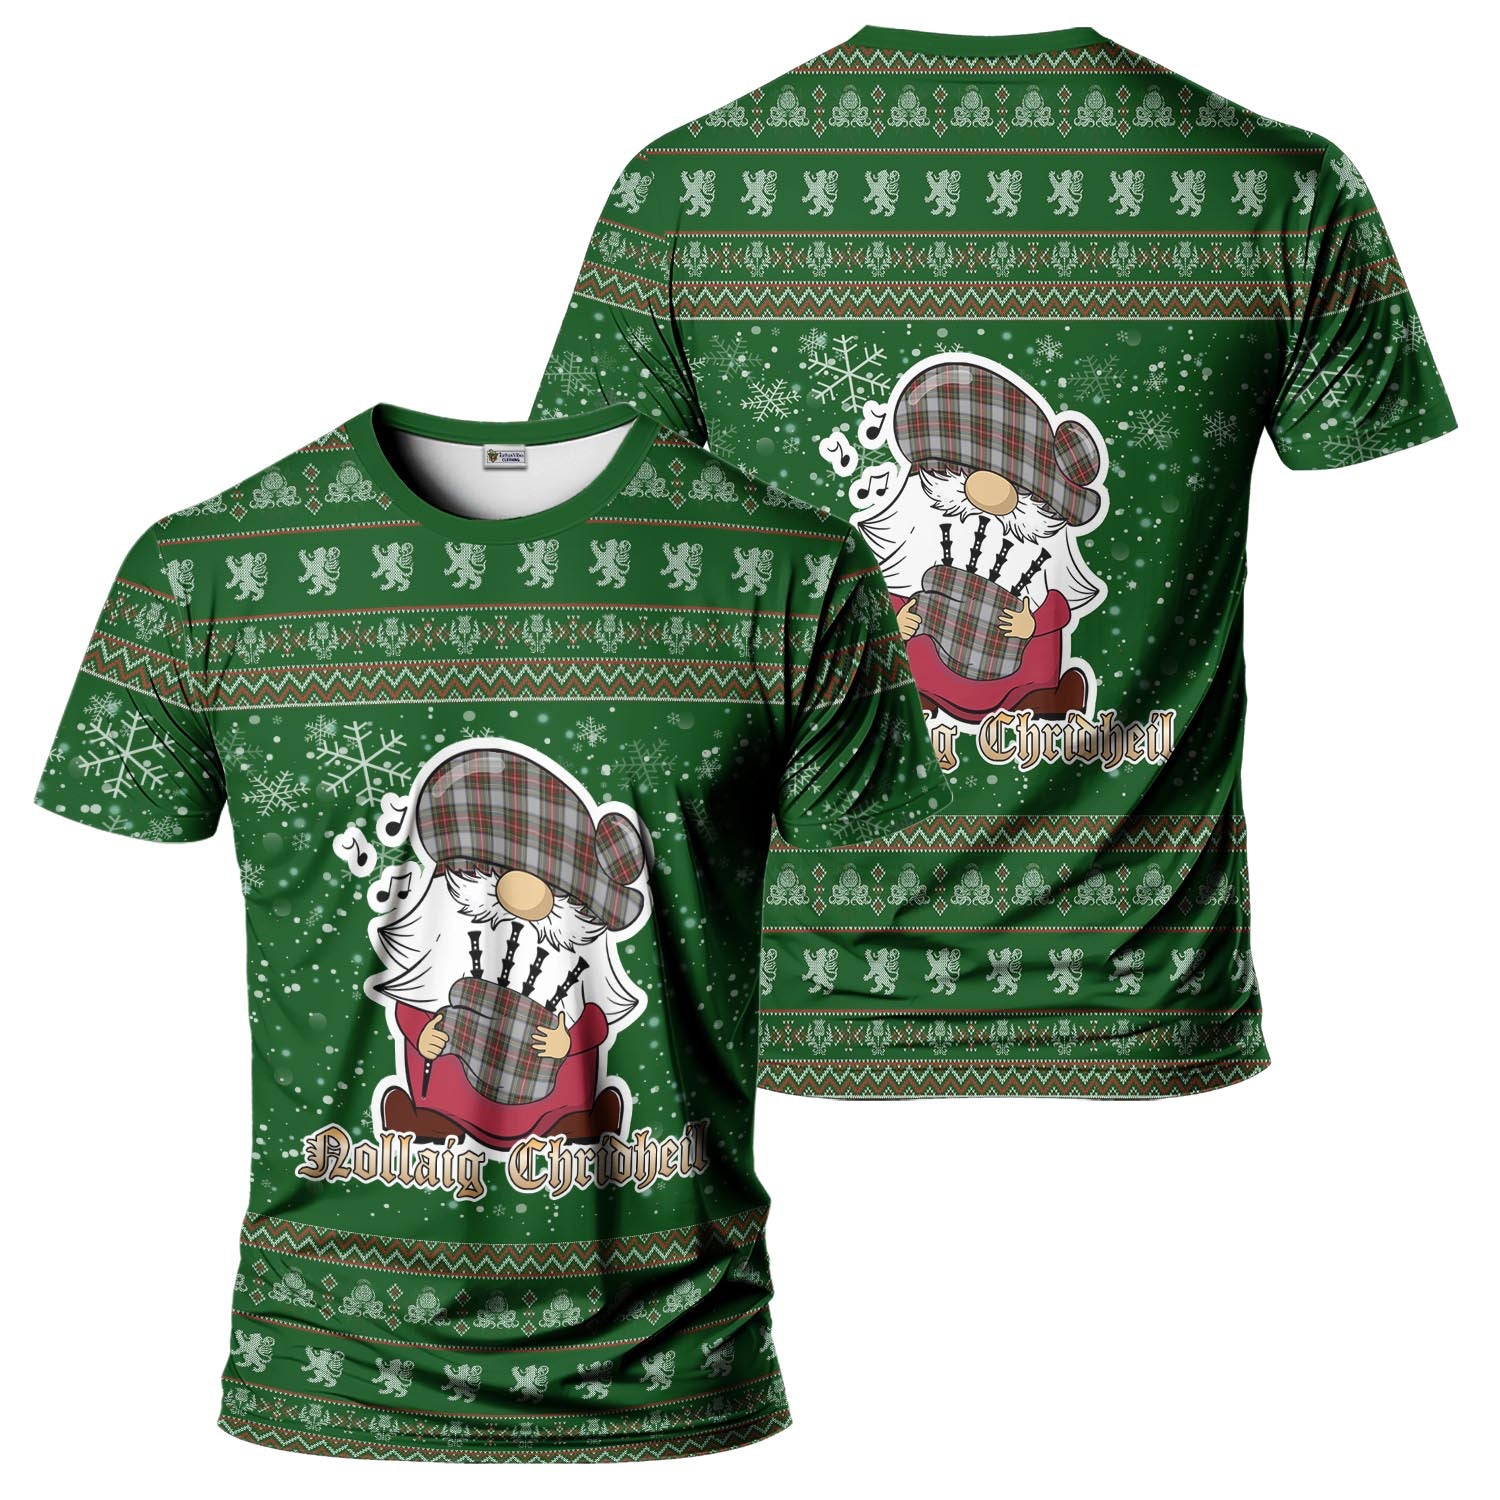 Stewart Dress Clan Christmas Family T-Shirt with Funny Gnome Playing Bagpipes Men's Shirt Green - Tartanvibesclothing